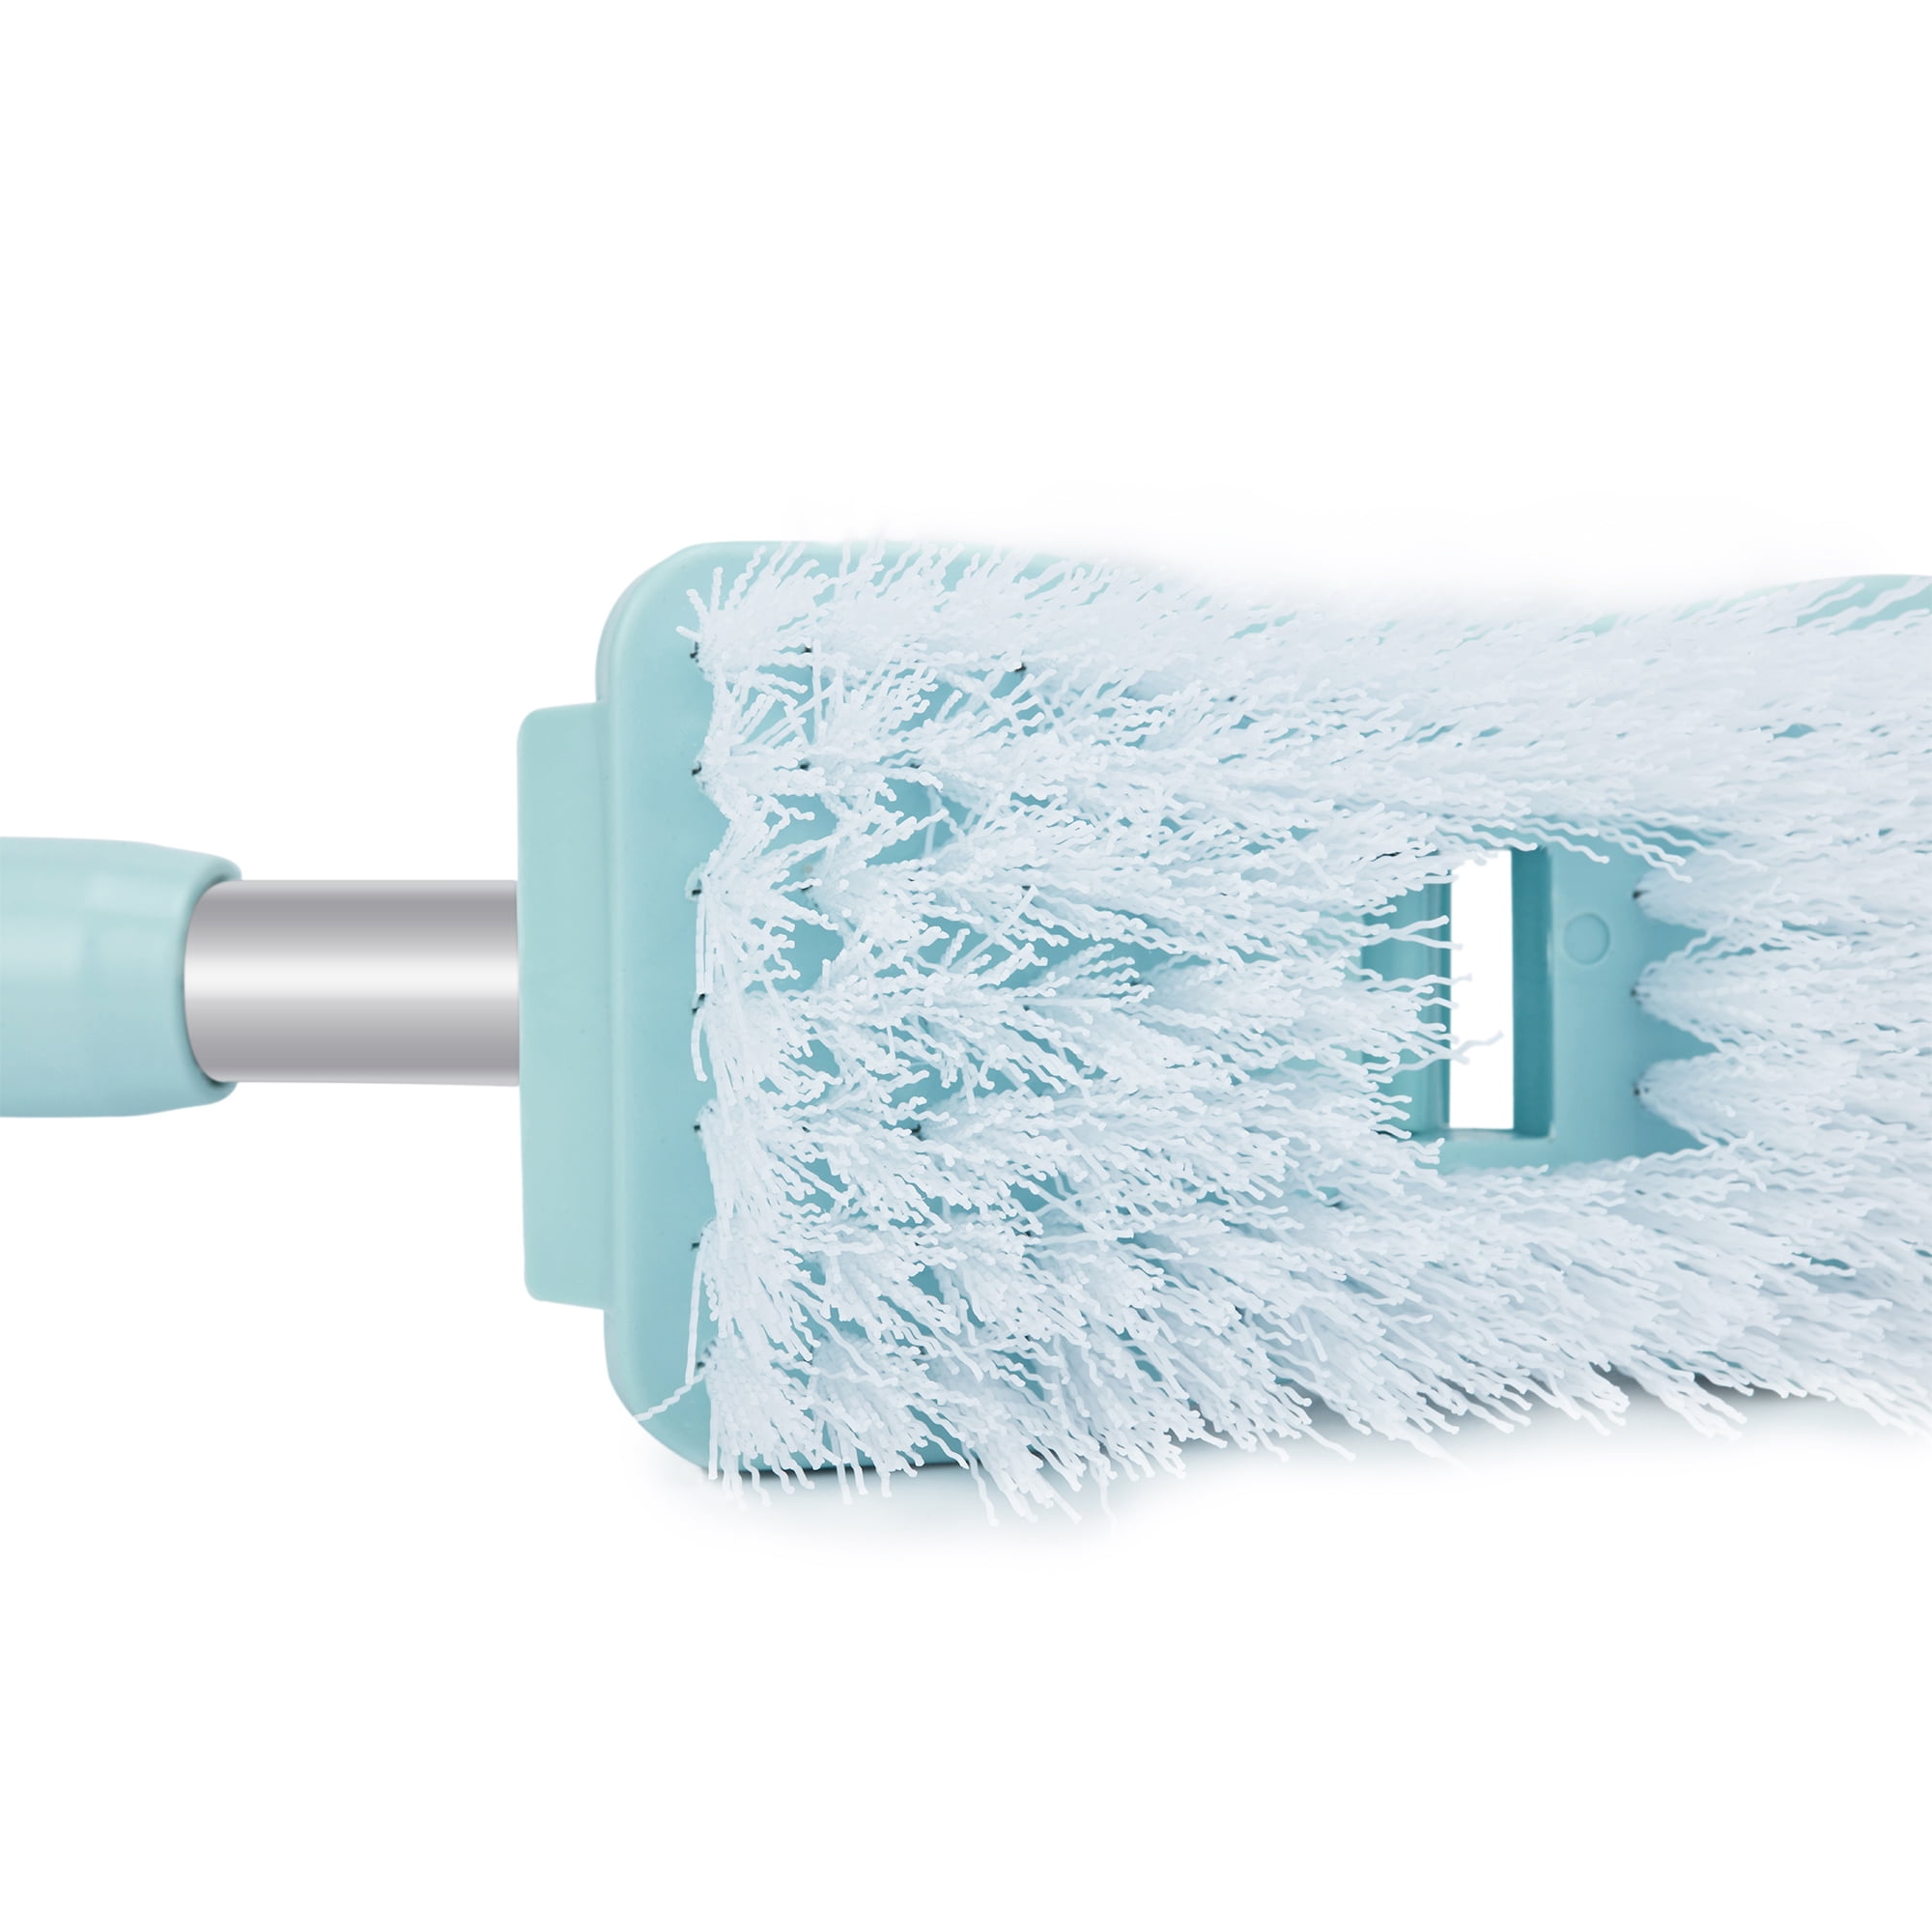 2 in 1 Scrub Brush With Adjustable Long Handle 120° Rotating Removable –  Vital Mart